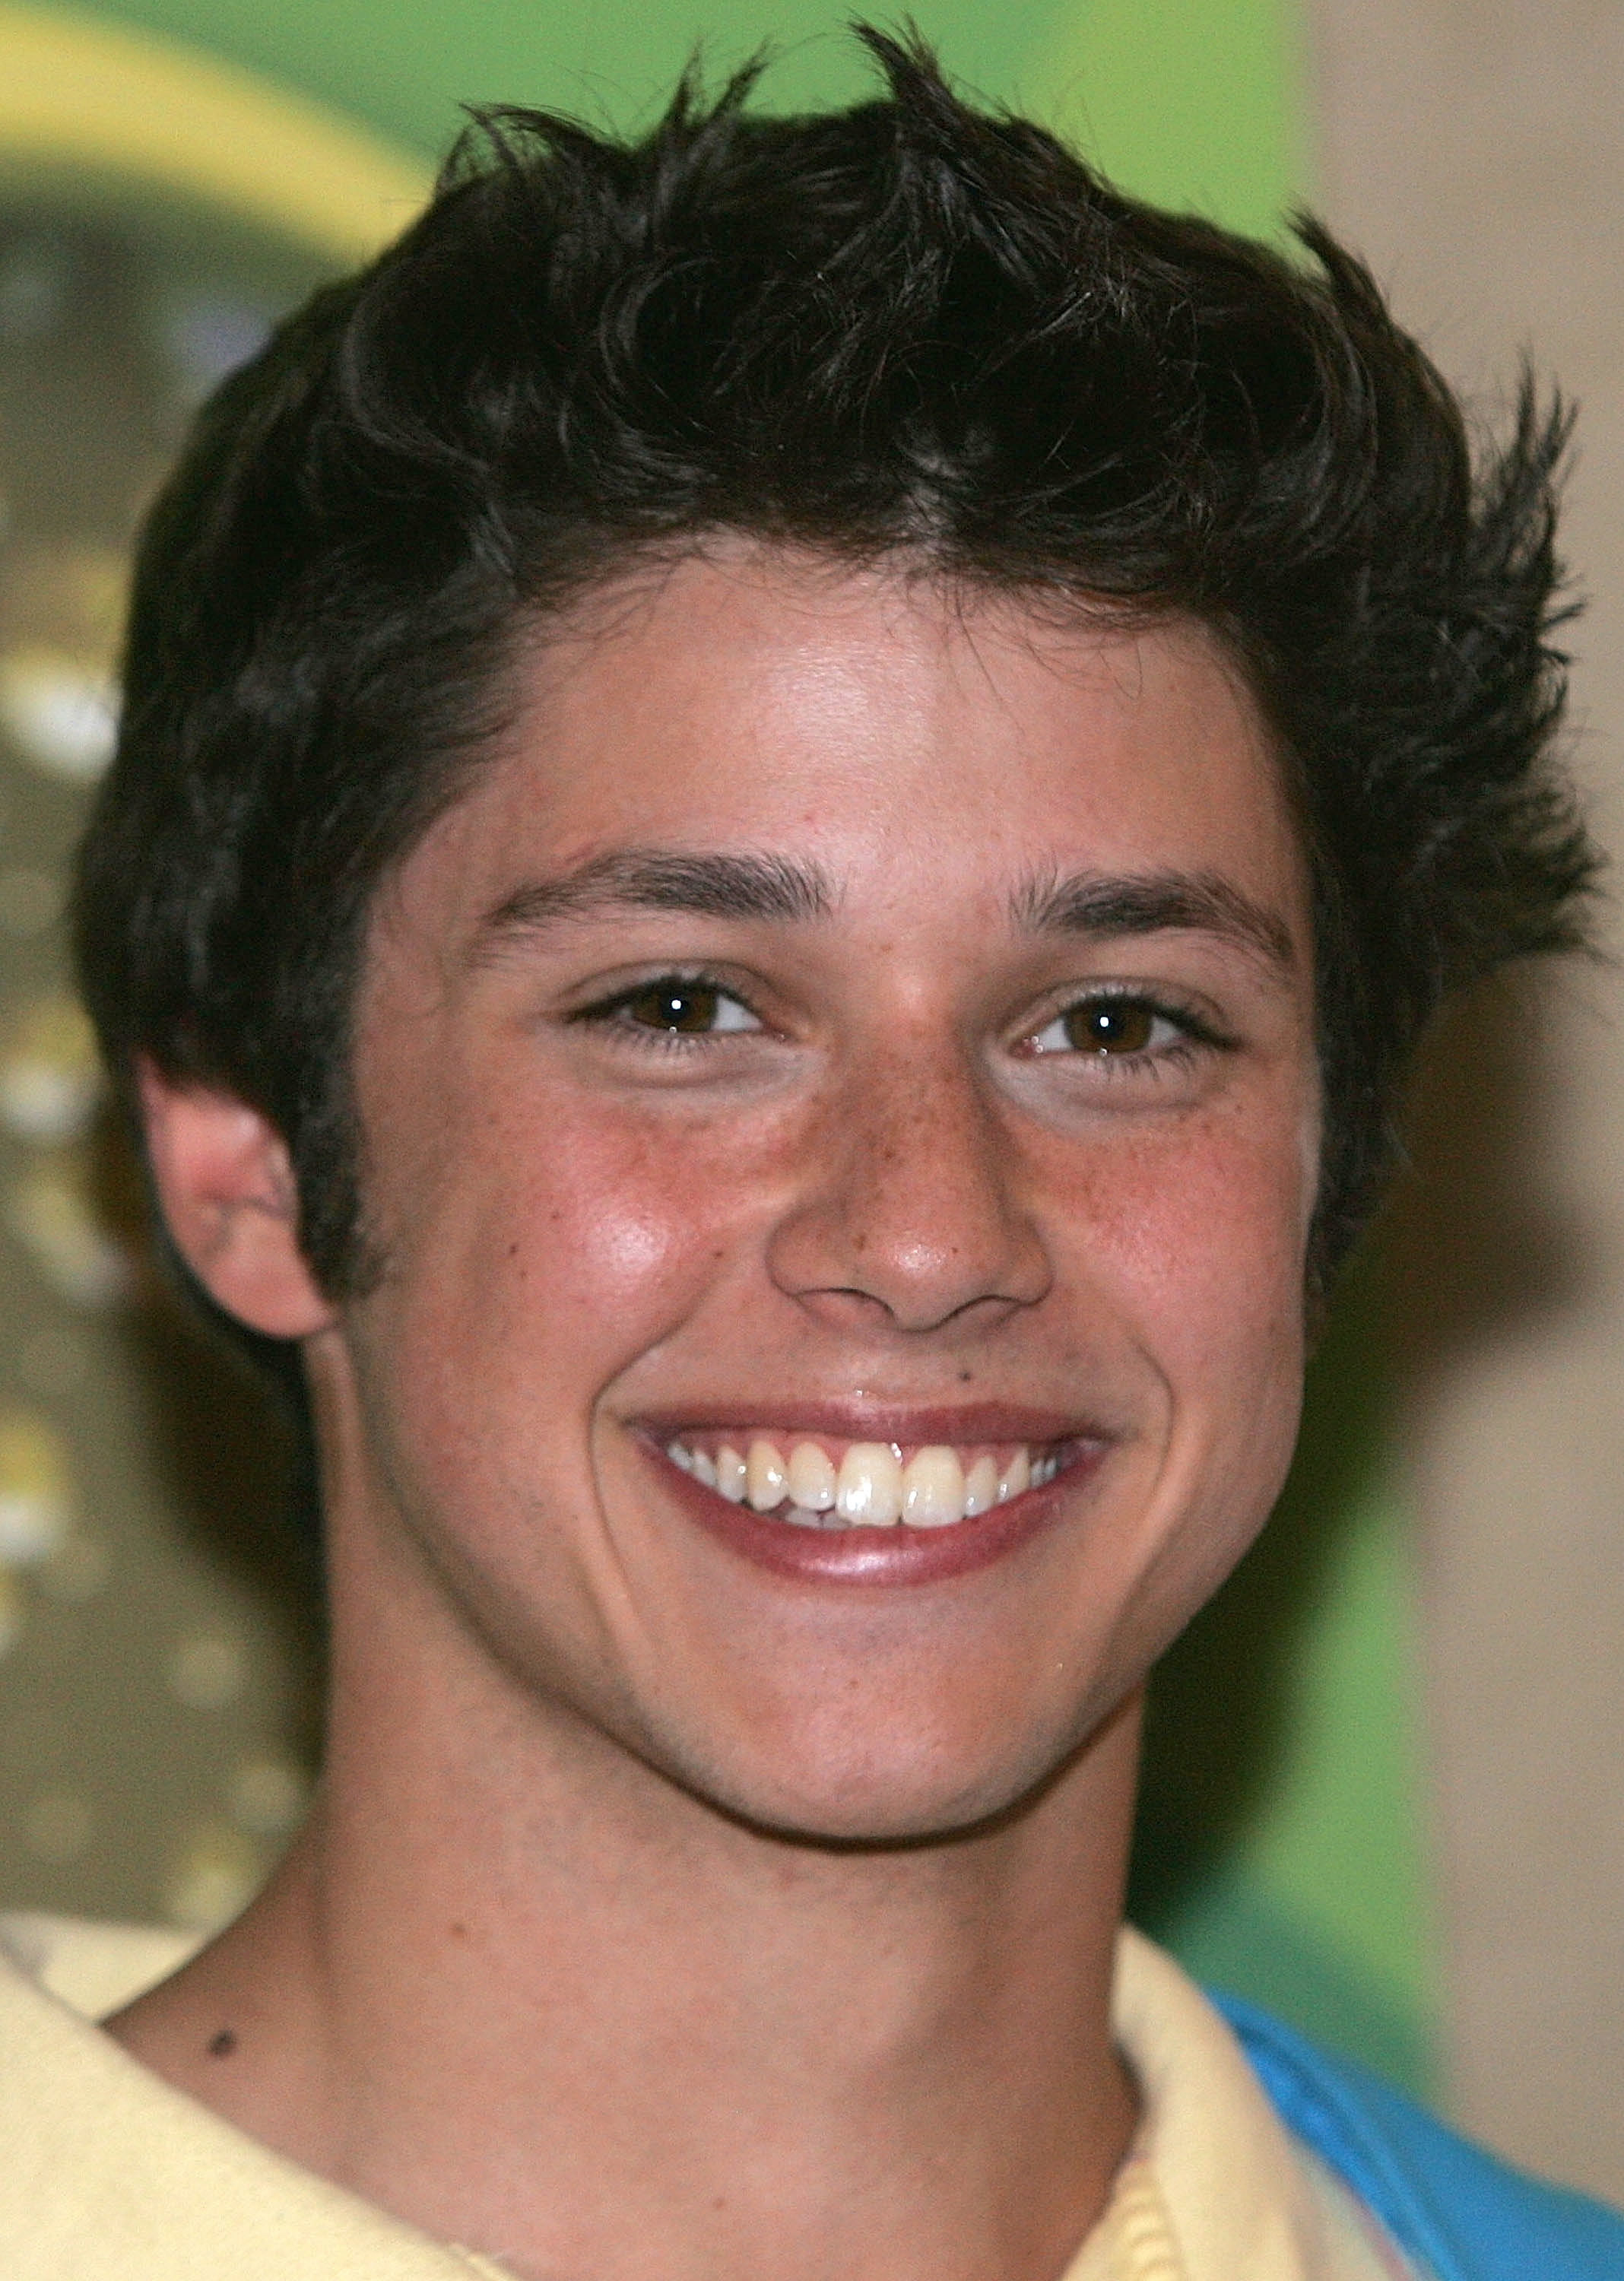 Raviv Ullman attends a 2005 &quot;Disney channel stars meet the press&quot; event in Los Angeles, CA